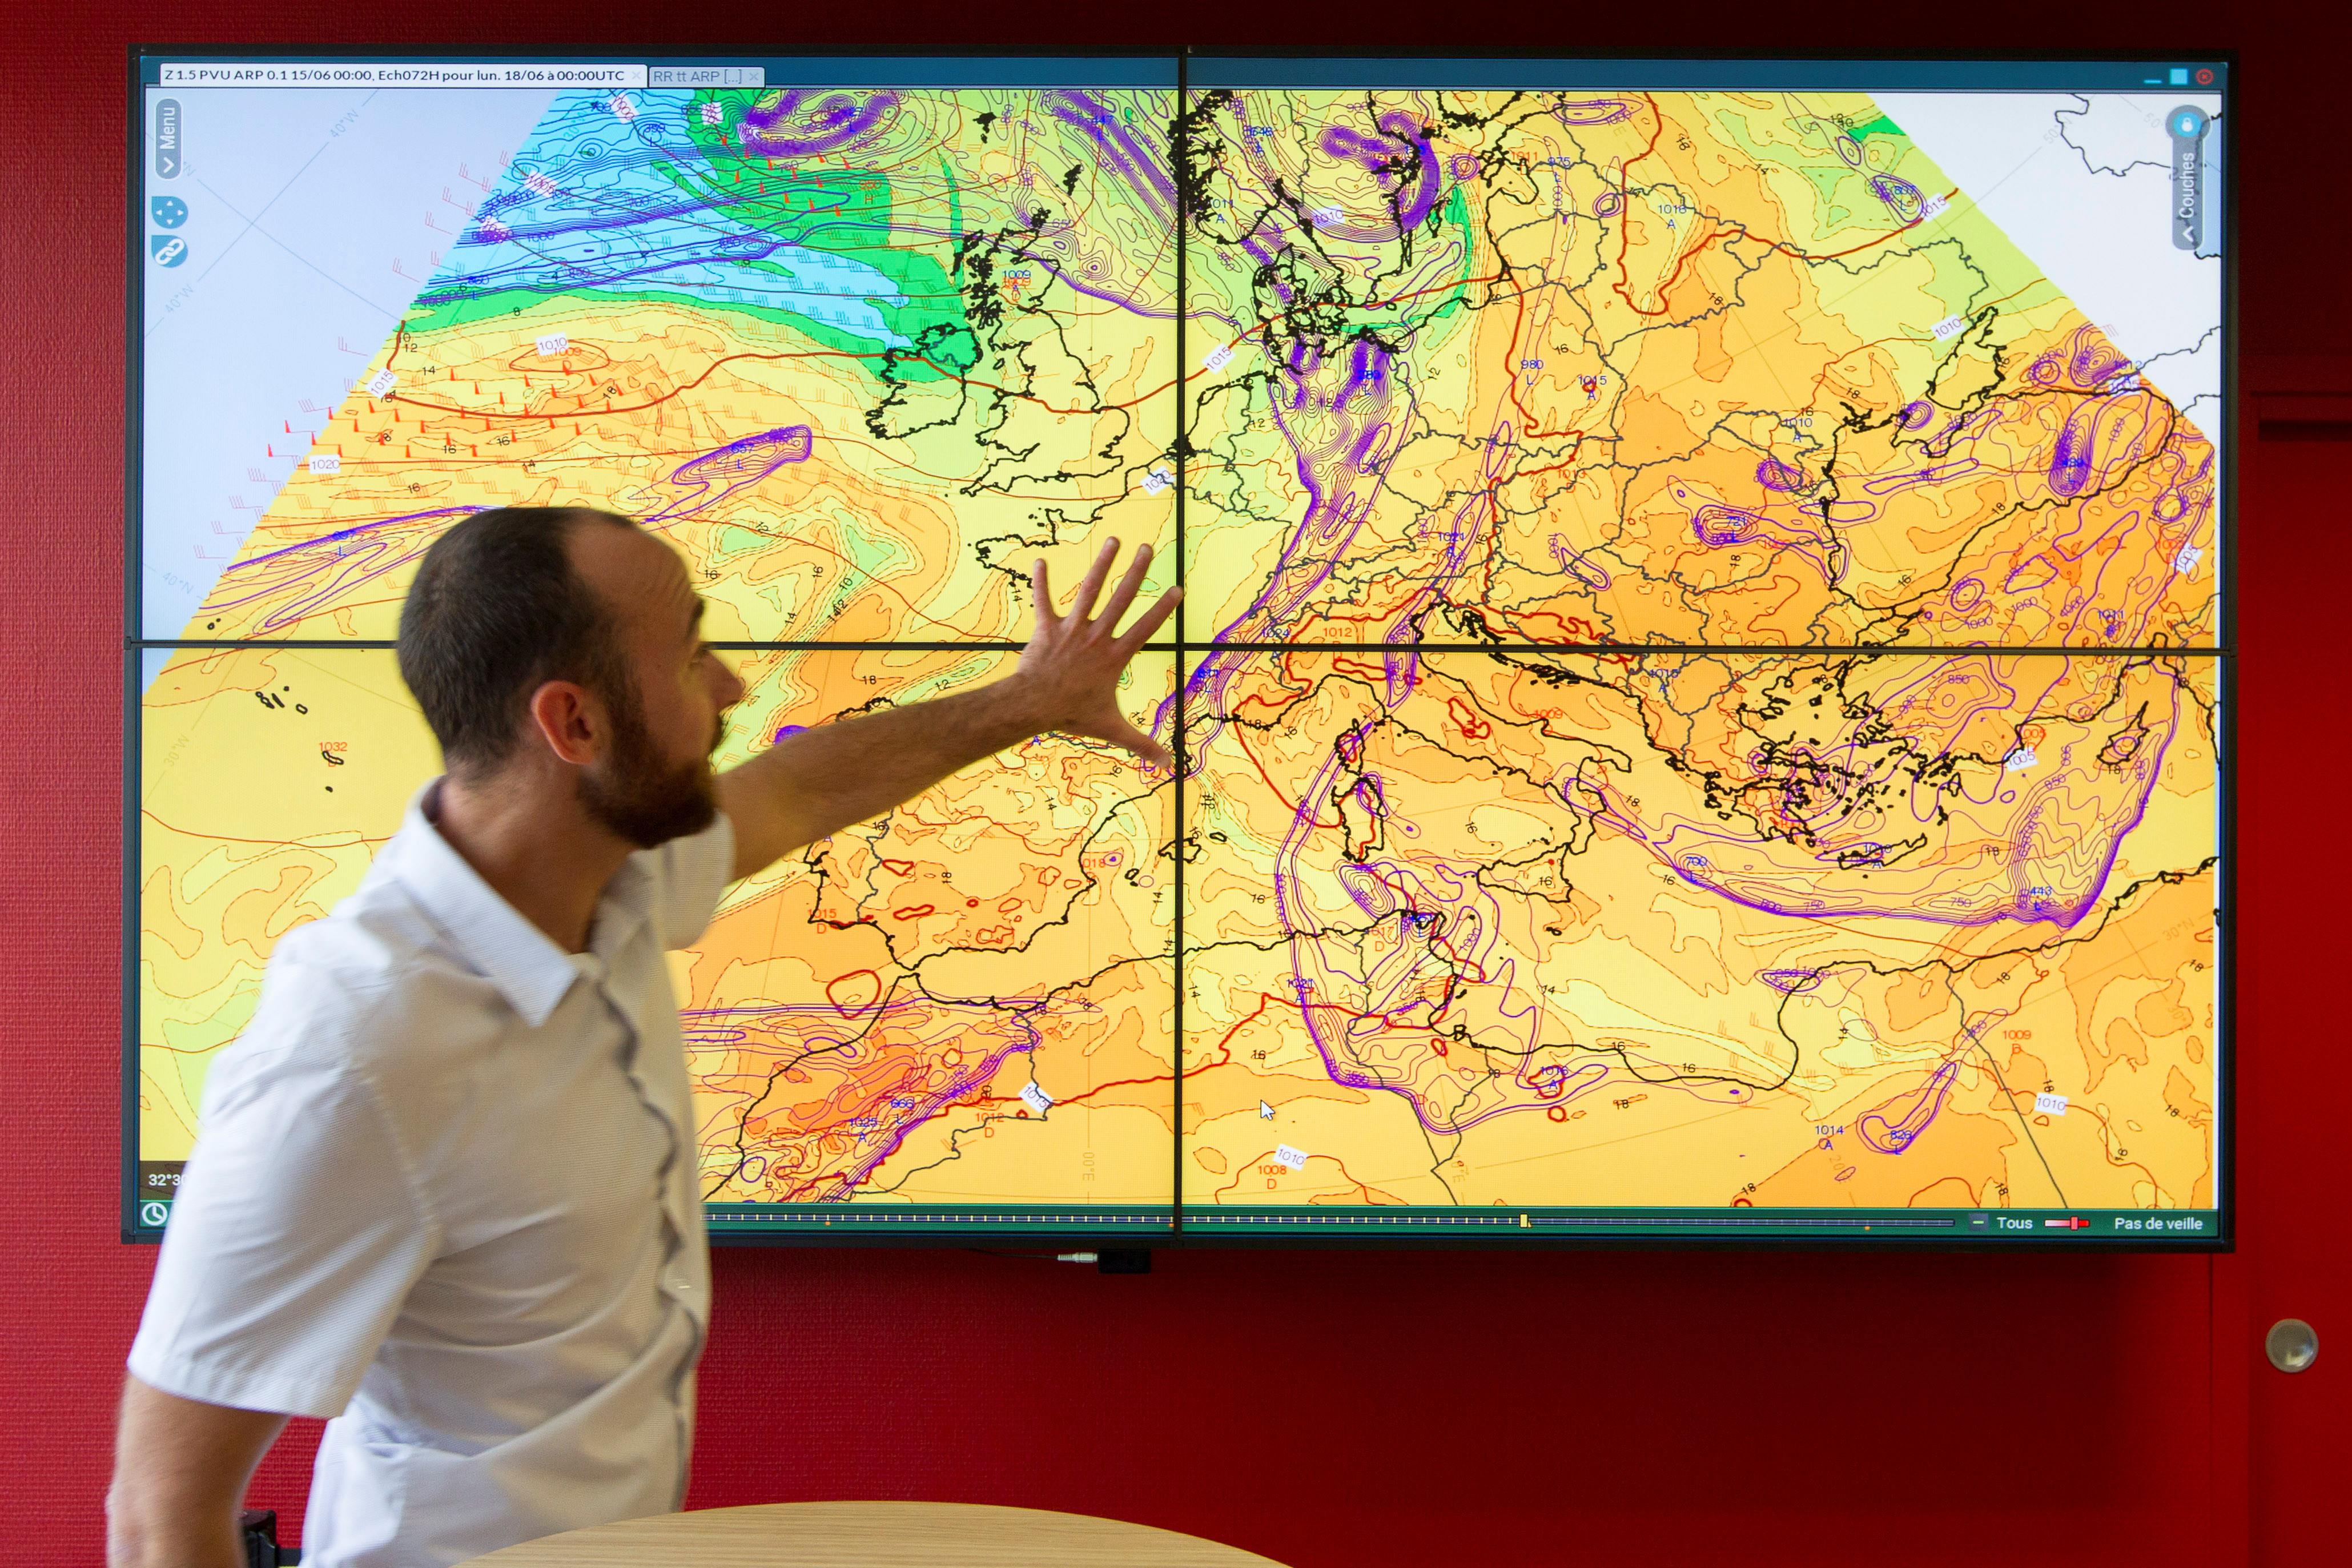 Weather maps are seen during a visit at the EDFDTG division for weather forecasts in Grenoble, France, June 15, 2018.